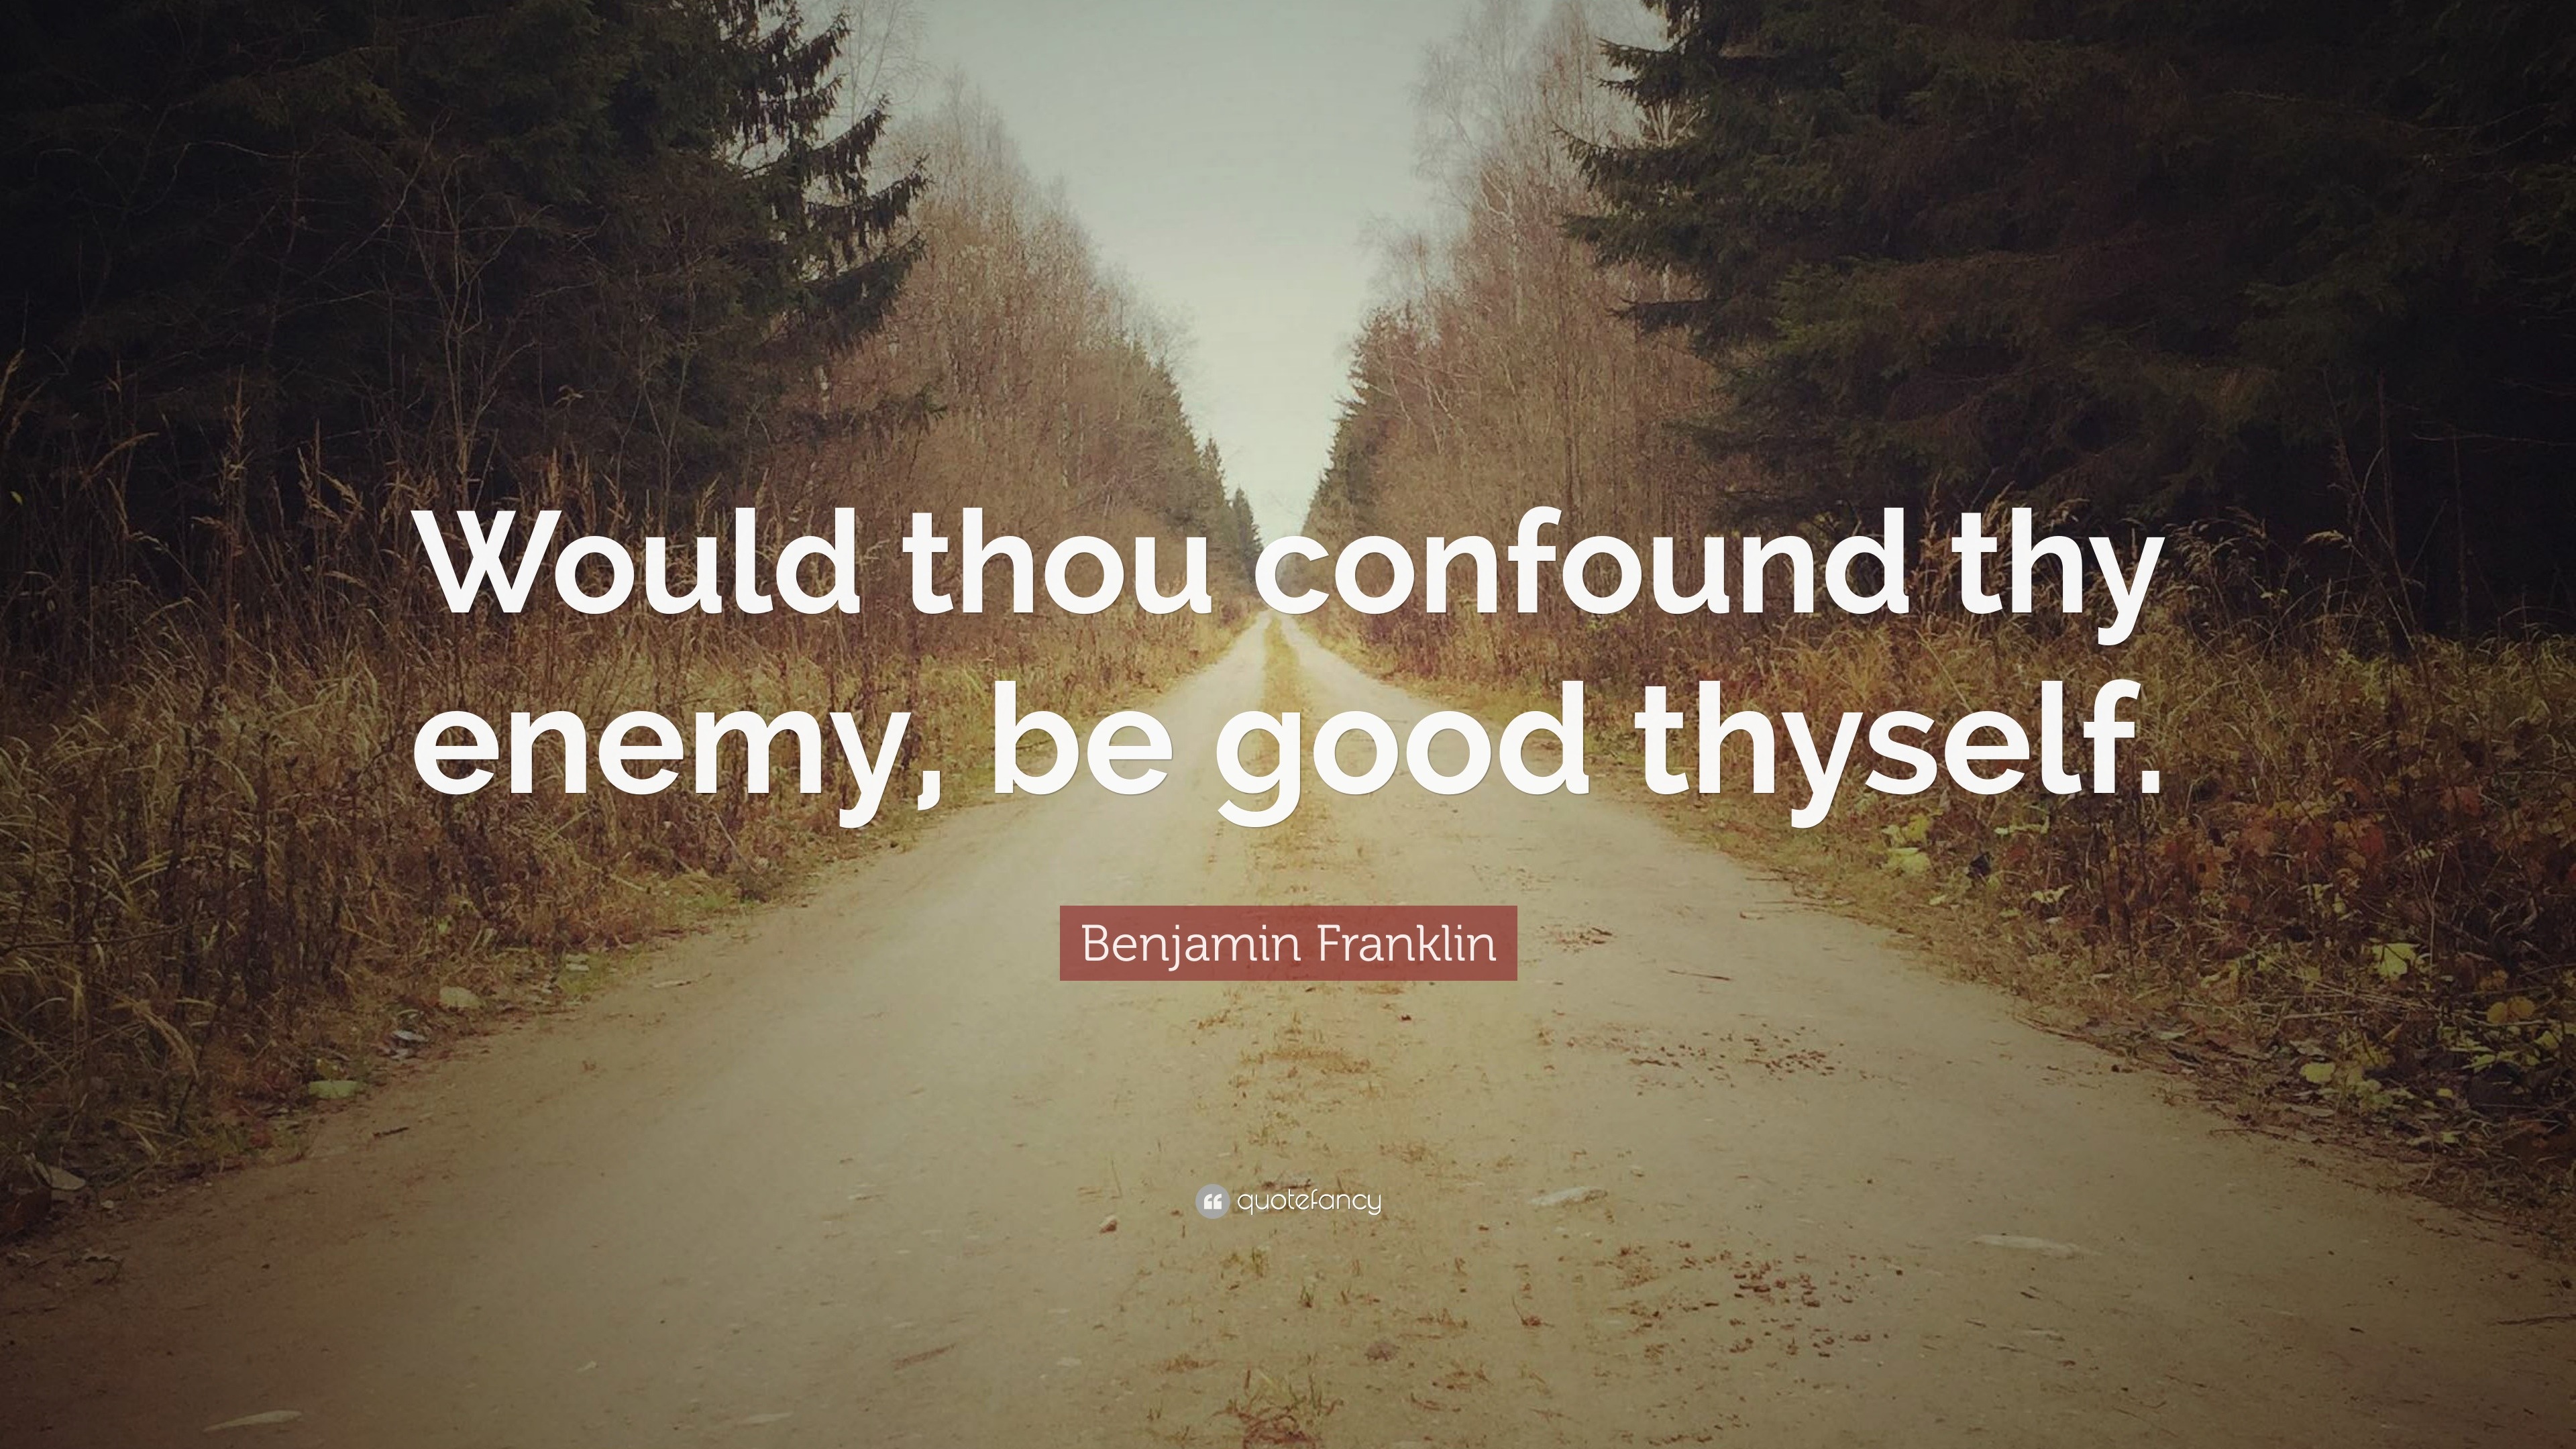 Benjamin Franklin Quote: “Would thou confound thy enemy, be good thyself.”